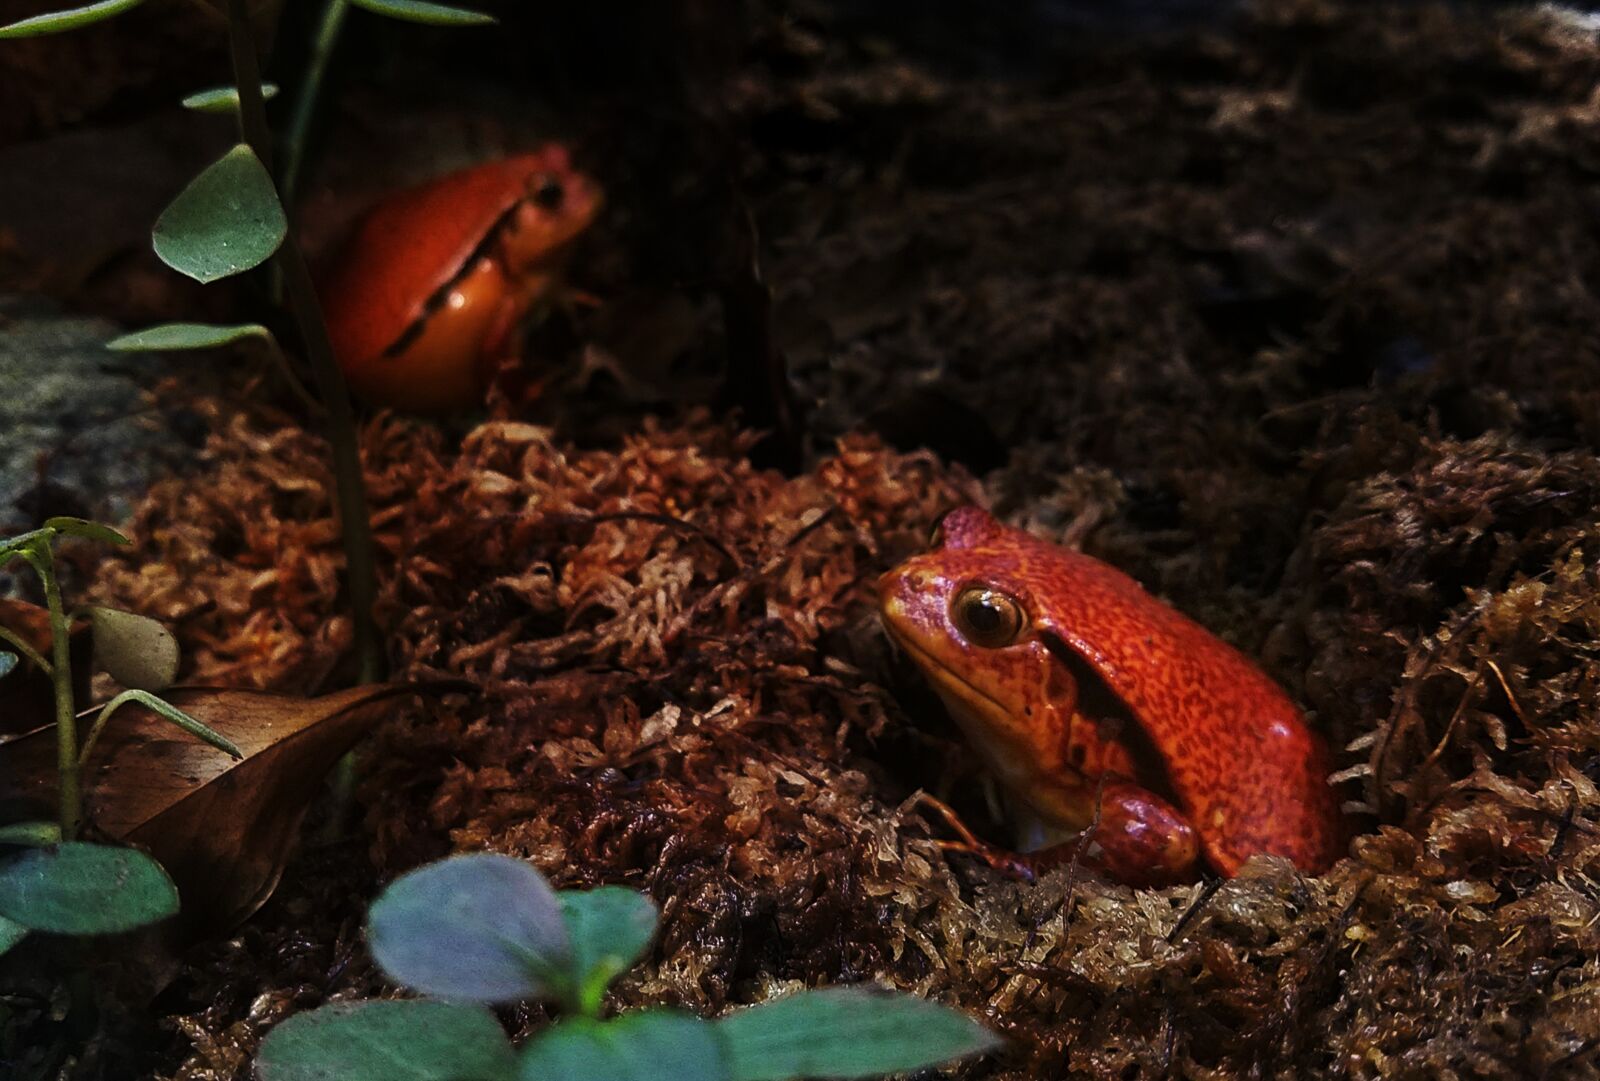 Samsung Galaxy S7 sample photo. Frog, red frog, rainforest photography